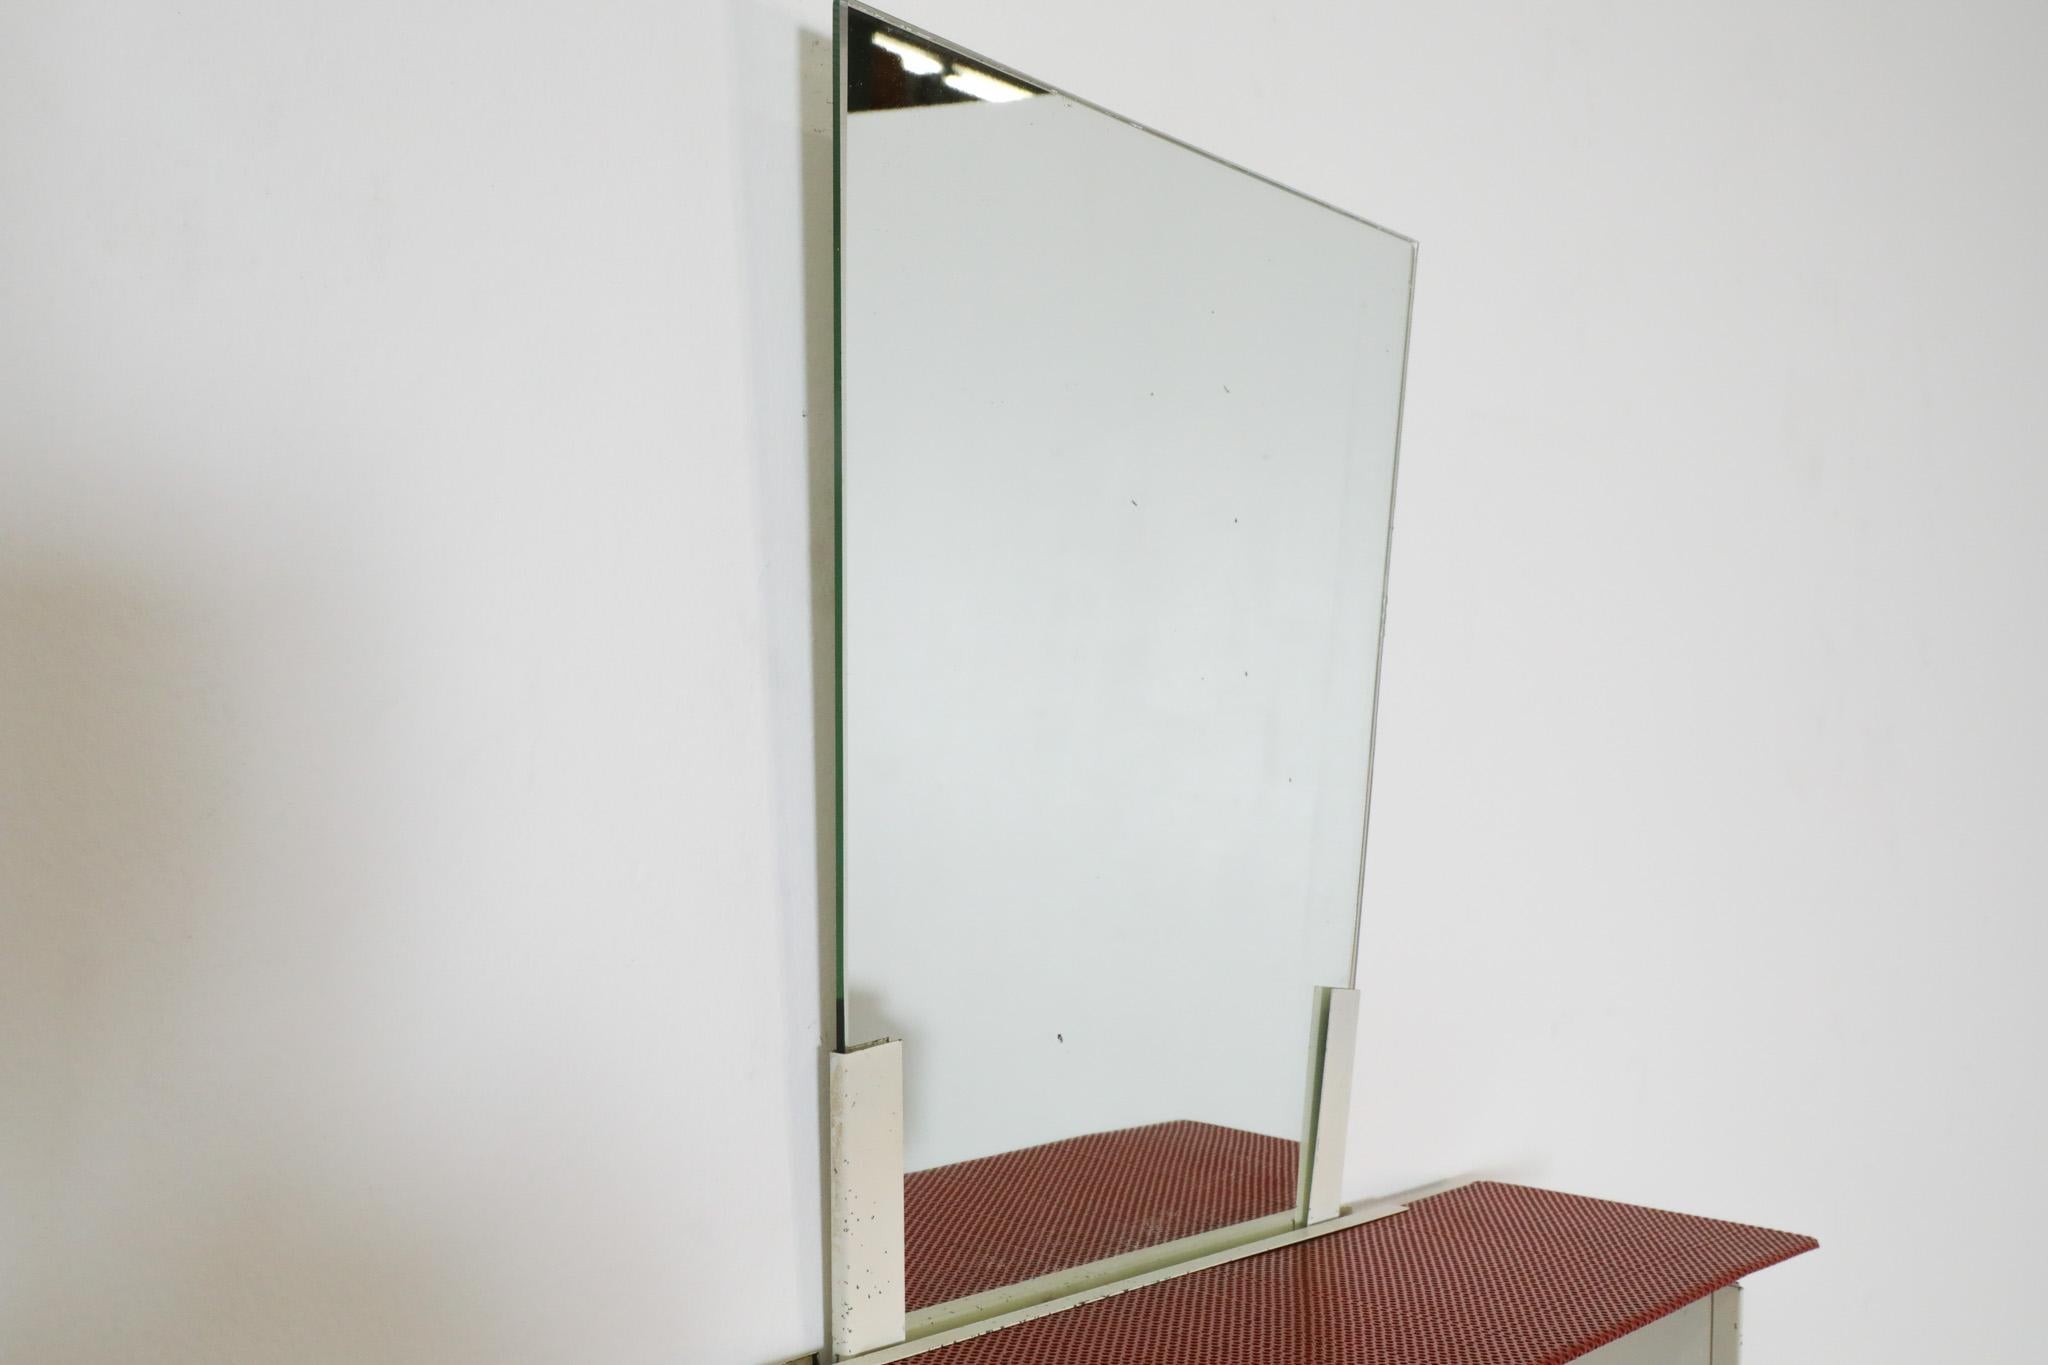 Mid-20th Century Mategot Style Wall Mirror with Red Metal Perforated Shelf & White Frame, 1950's For Sale